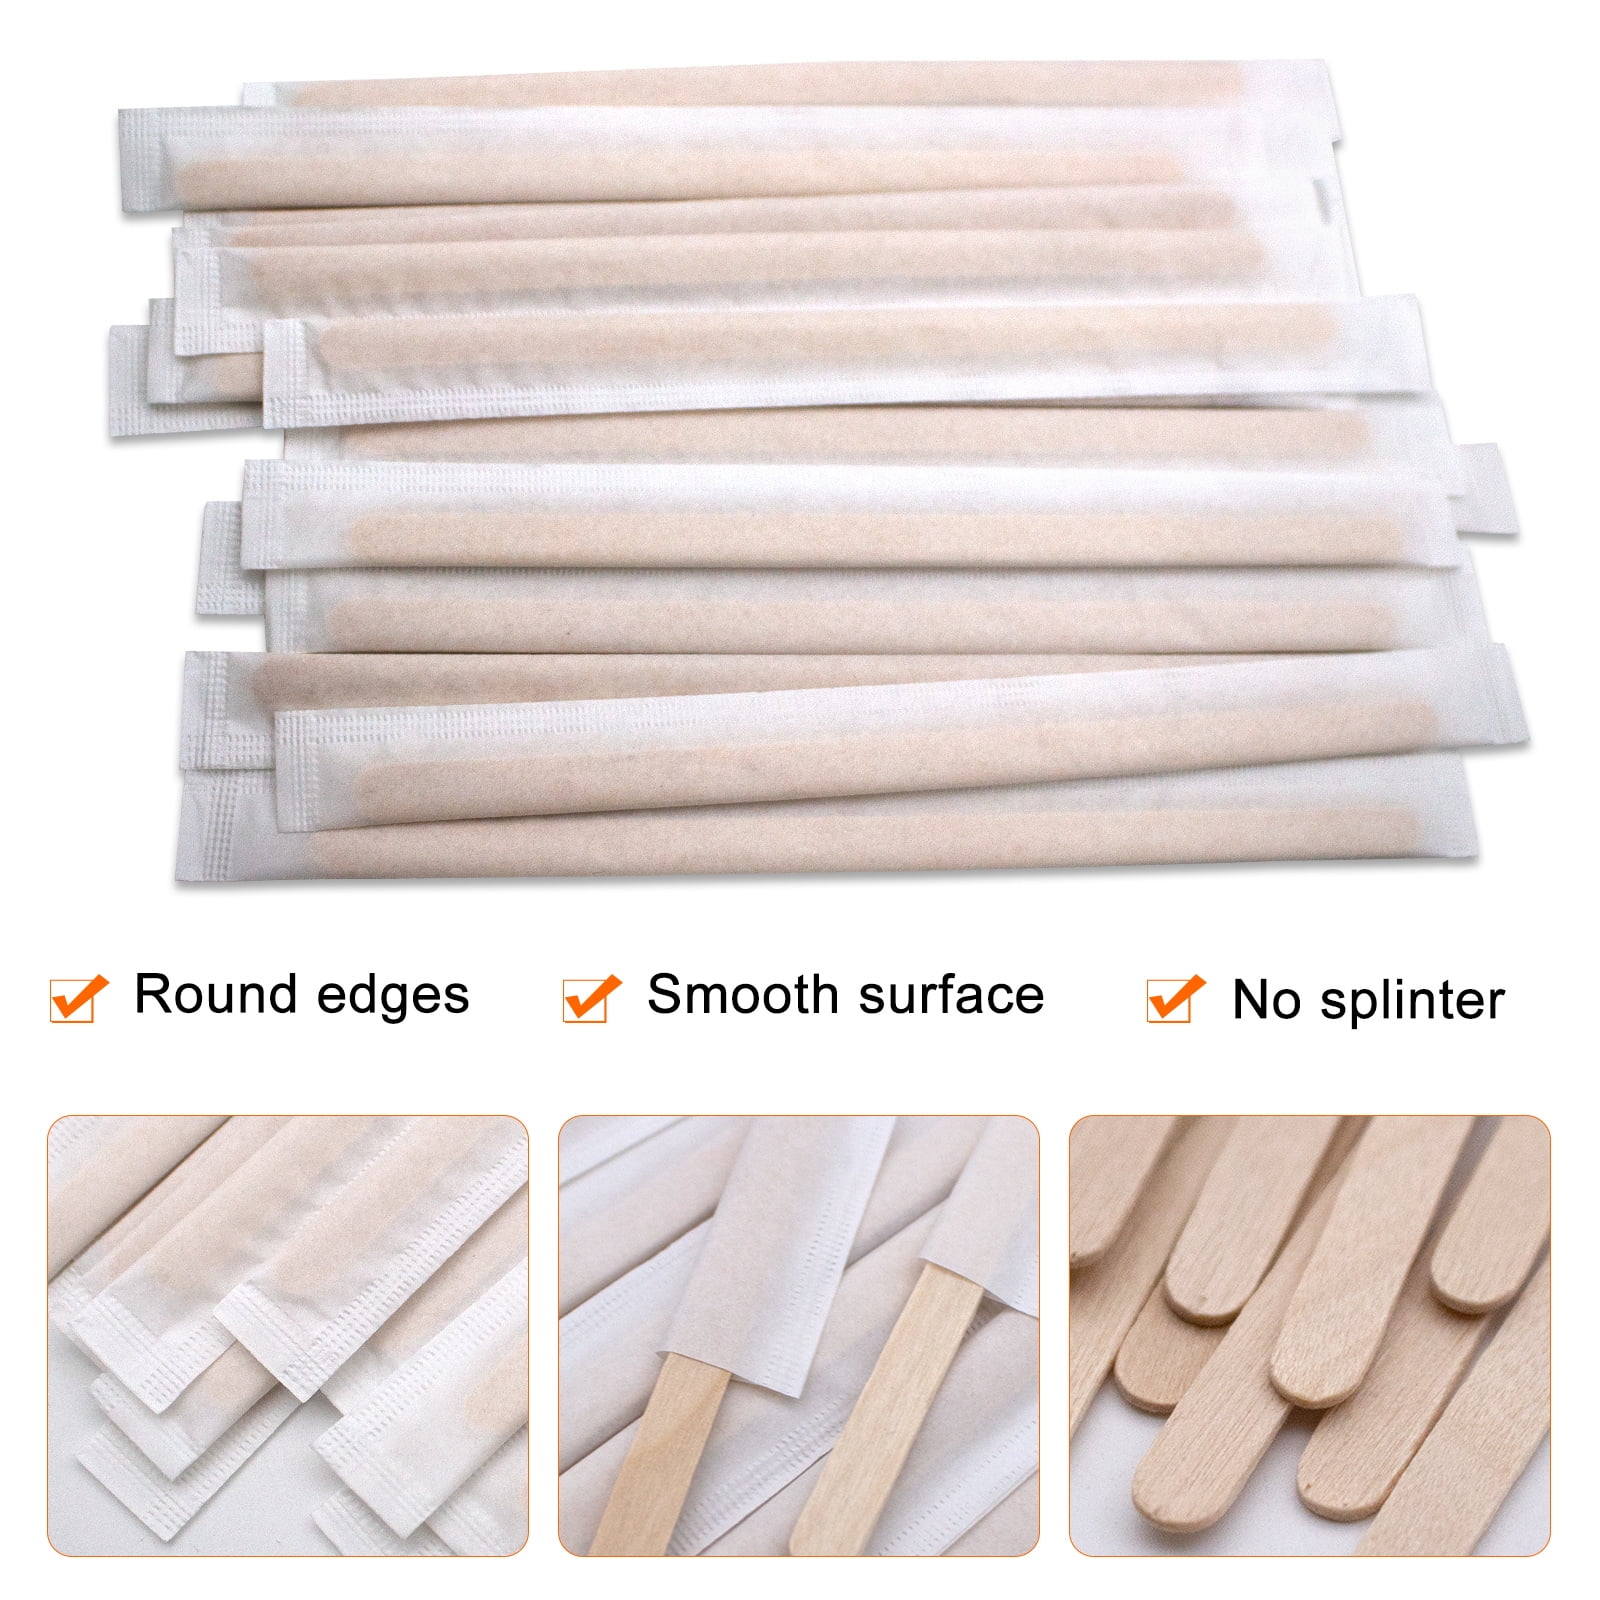 Wooden Coffee stirrers For Hot drinks 5.5'' / 7'' Buy up to 10,000 pcs